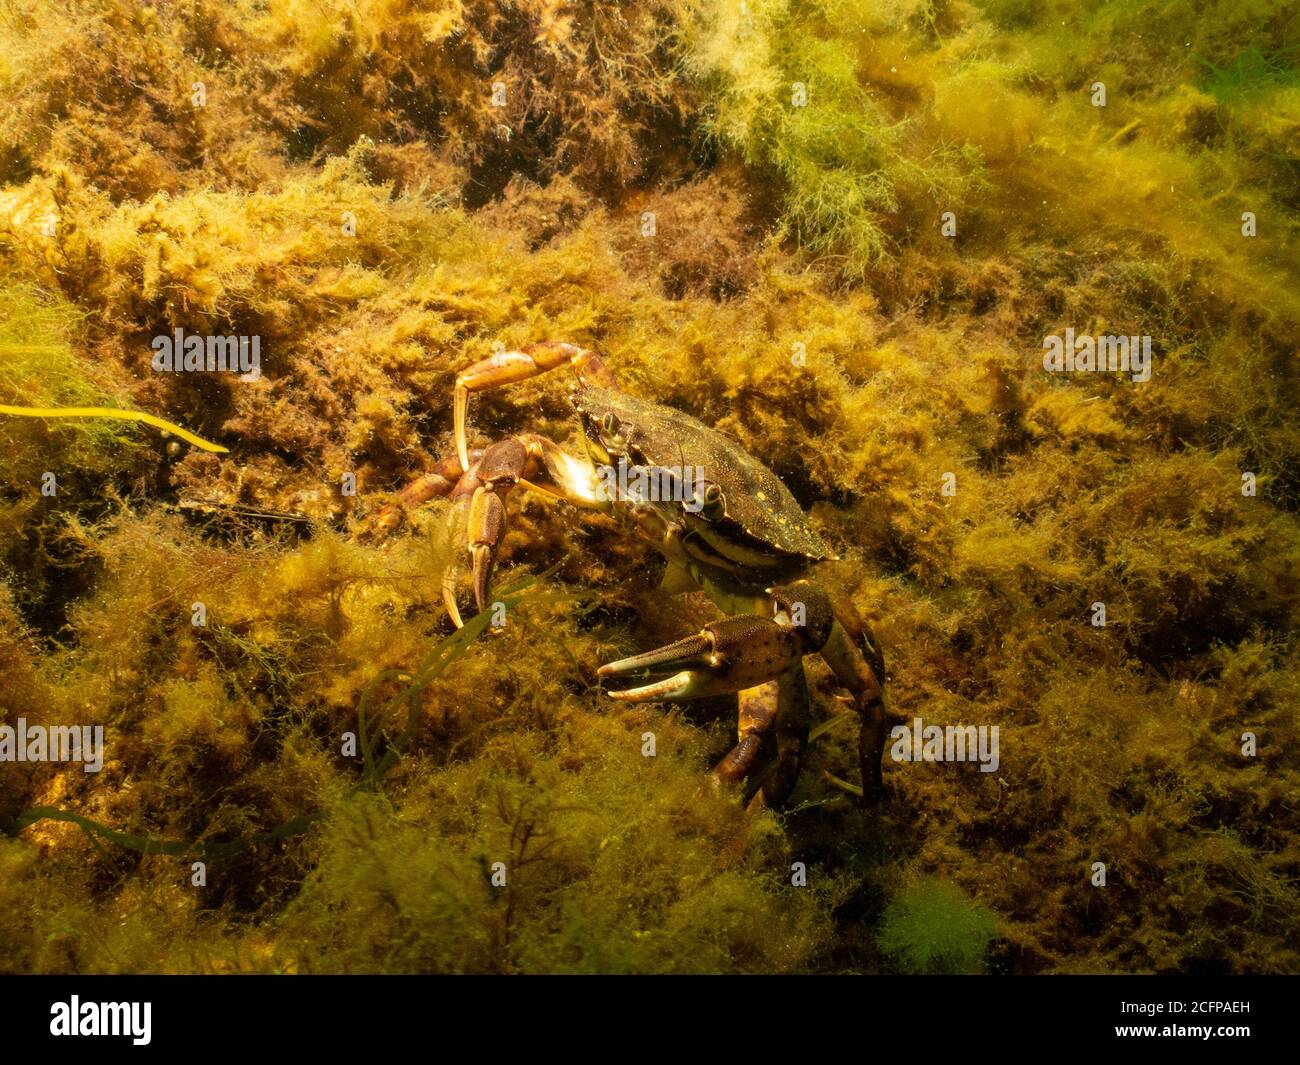 A closeup picture of a crab underwater. Picture from Oresund, Malmo in southern Sweden. Stock Photo